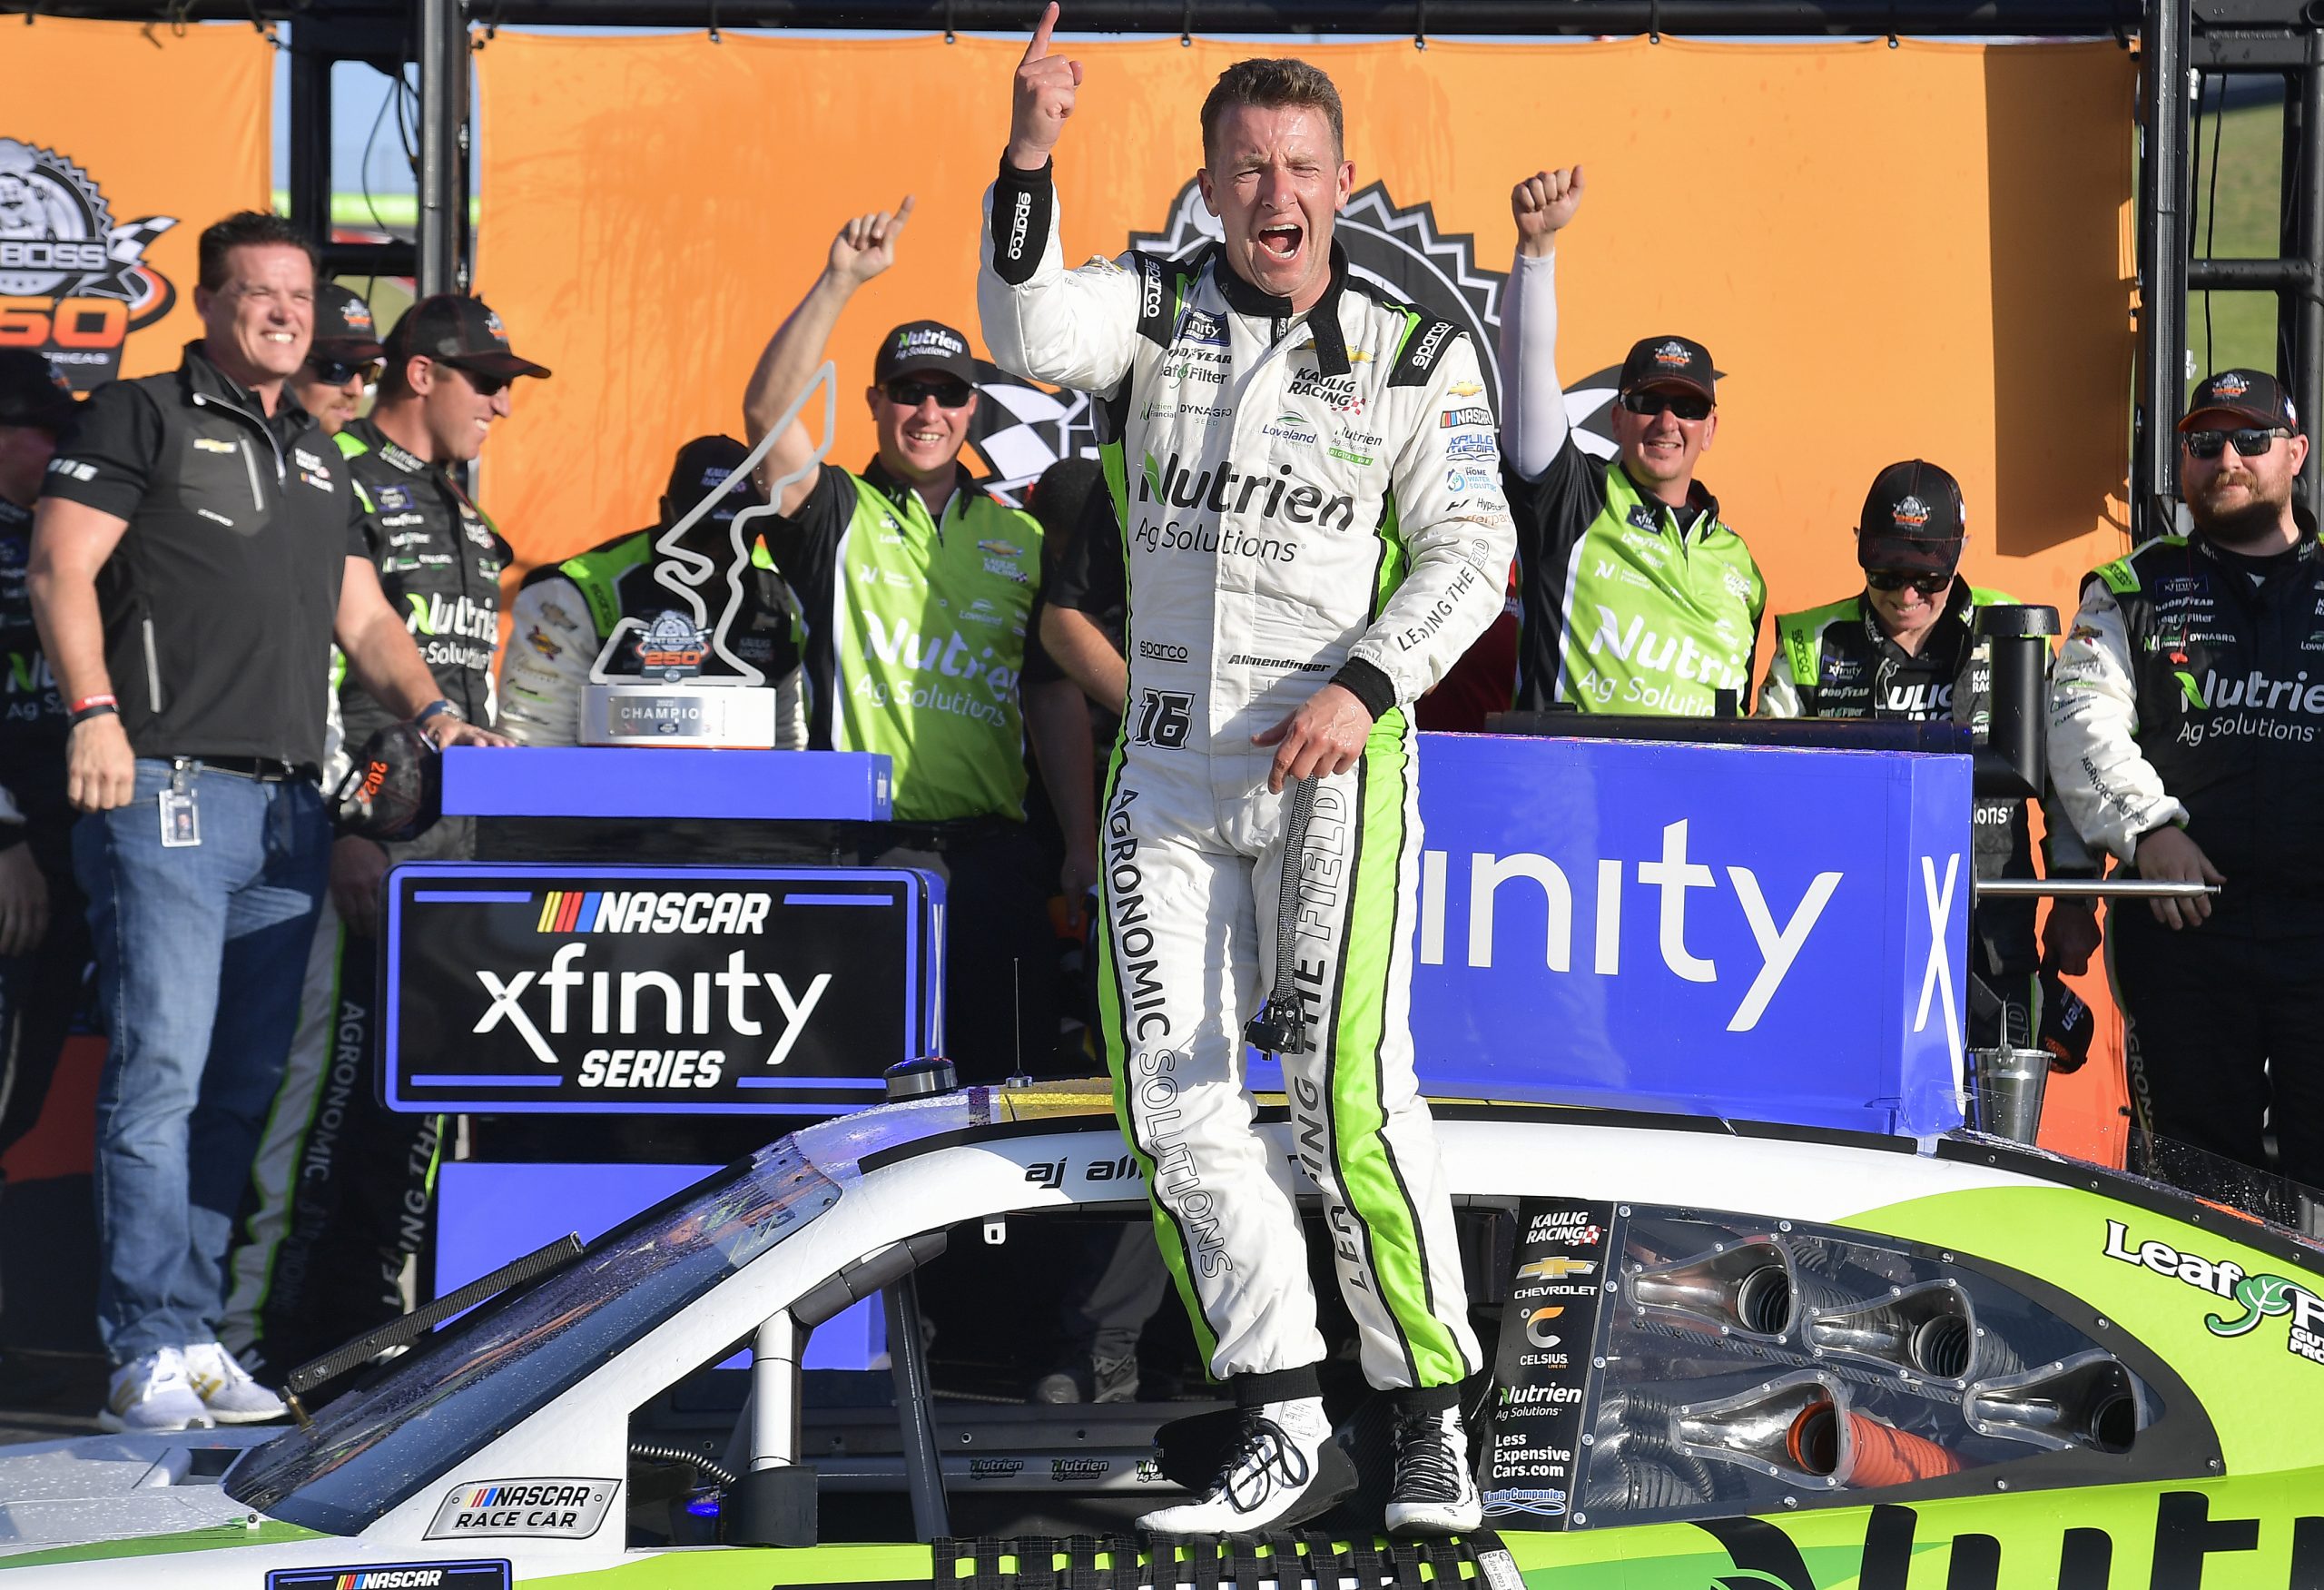 AUSTIN, TEXAS - MARCH 26: AJ Allmendinger, driver of the #16 Nutrien Ag Solutions Chevrolet, celebrates in victory lane after winning the NASCAR Xfinity Series Pit Boss 250 at Circuit of The Americas on March 26, 2022 in Austin, Texas. (Photo by Logan Riely/Getty Images)